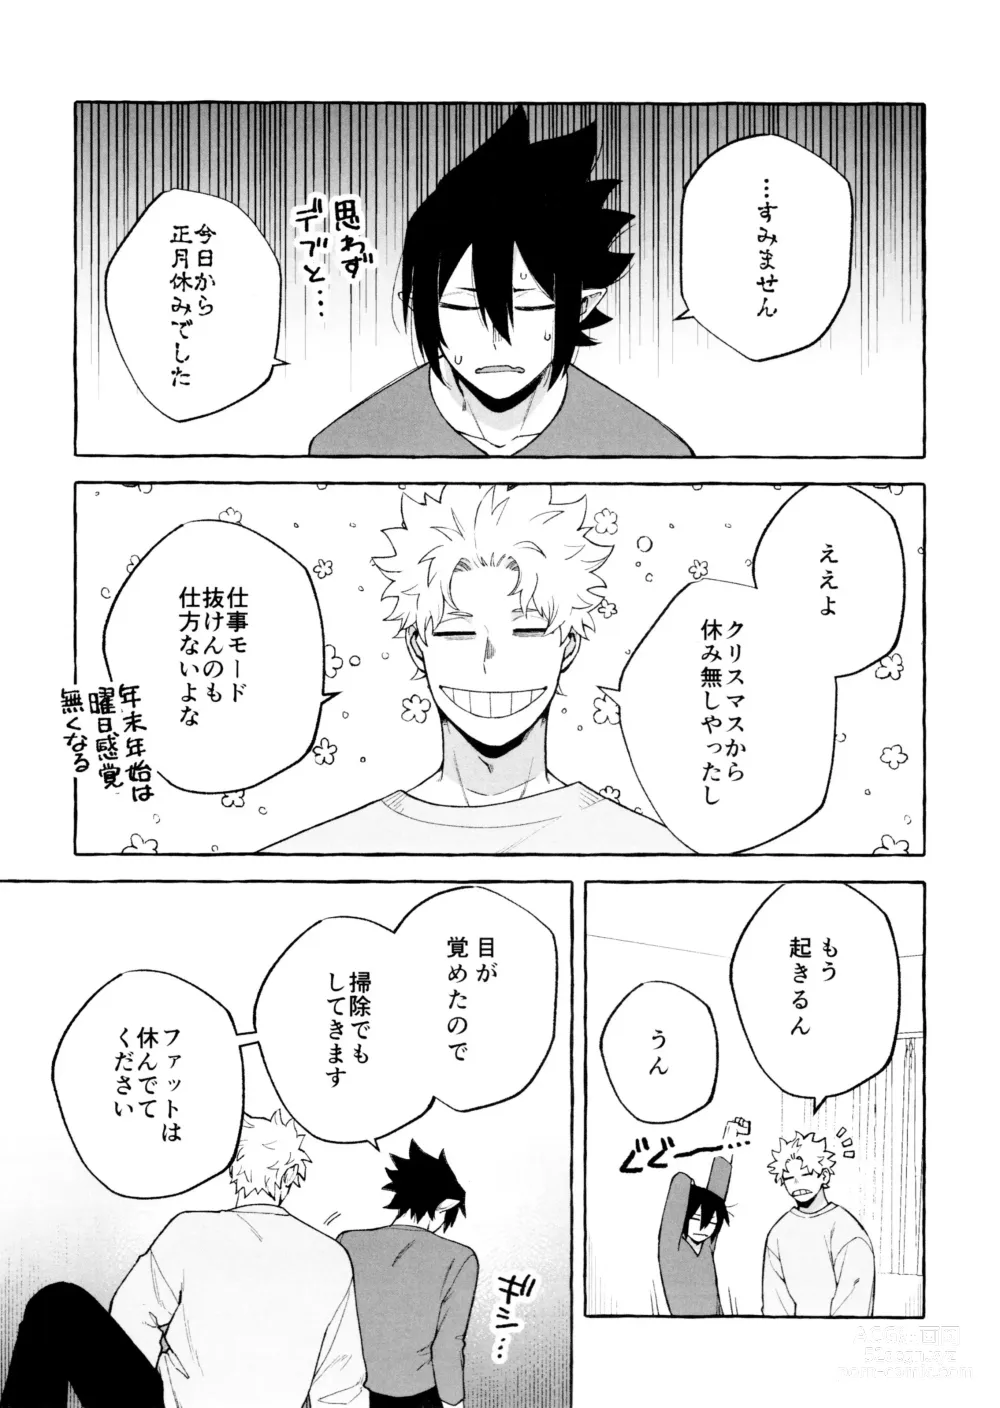 Page 5 of doujinshi Please please